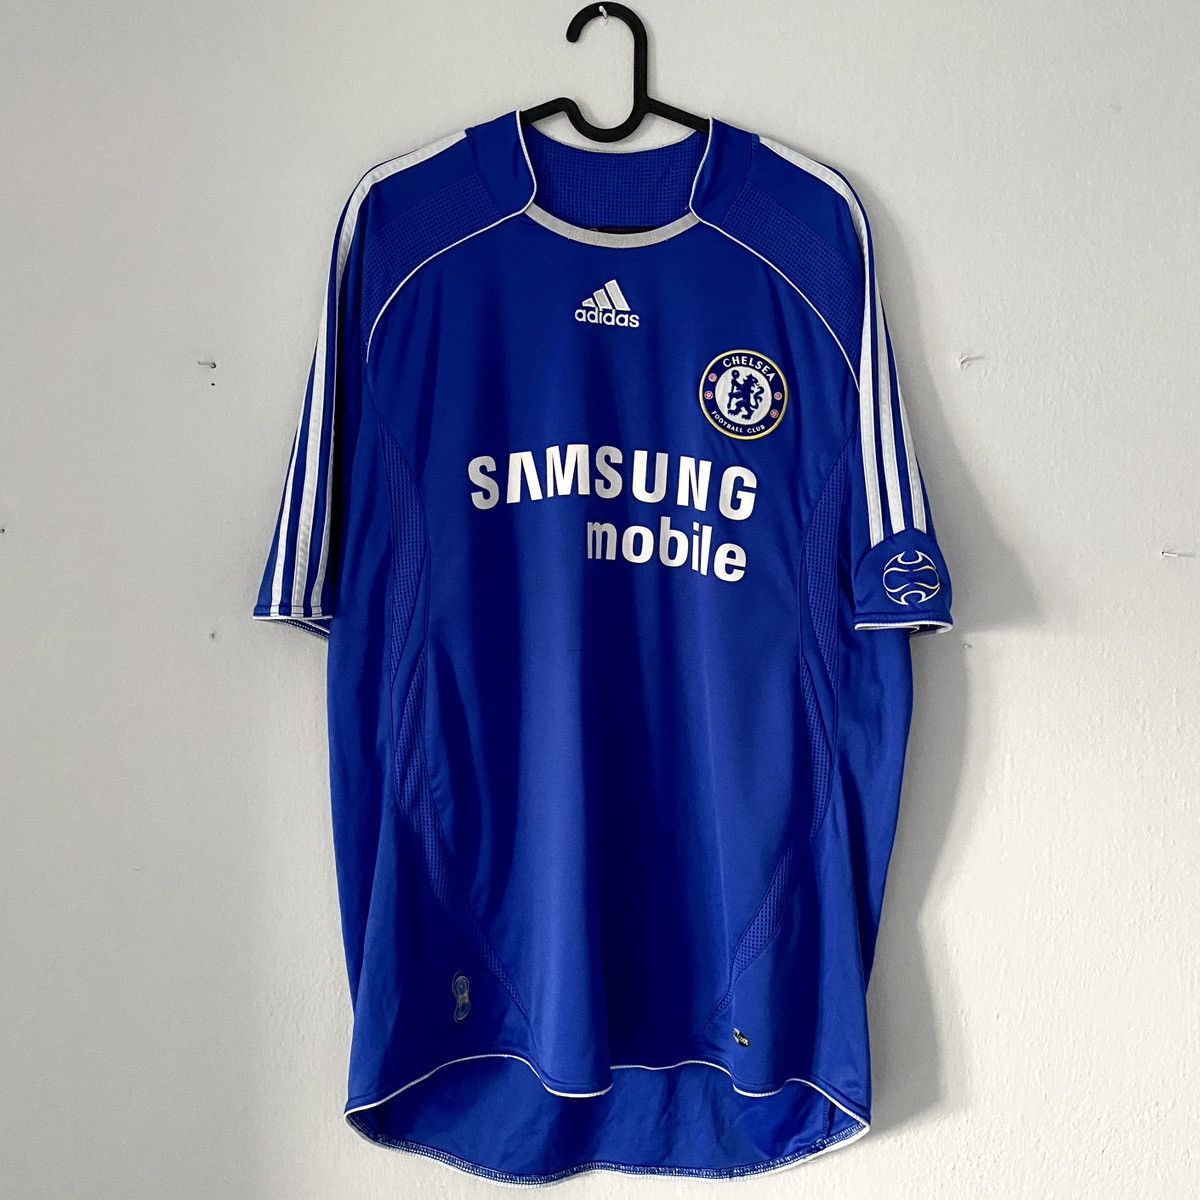 Adidas 2006 2007 Chelsea London Adidas Vintage Home Soccer Jersey Size US L / EU 52-54 / 3 - 2 Preview